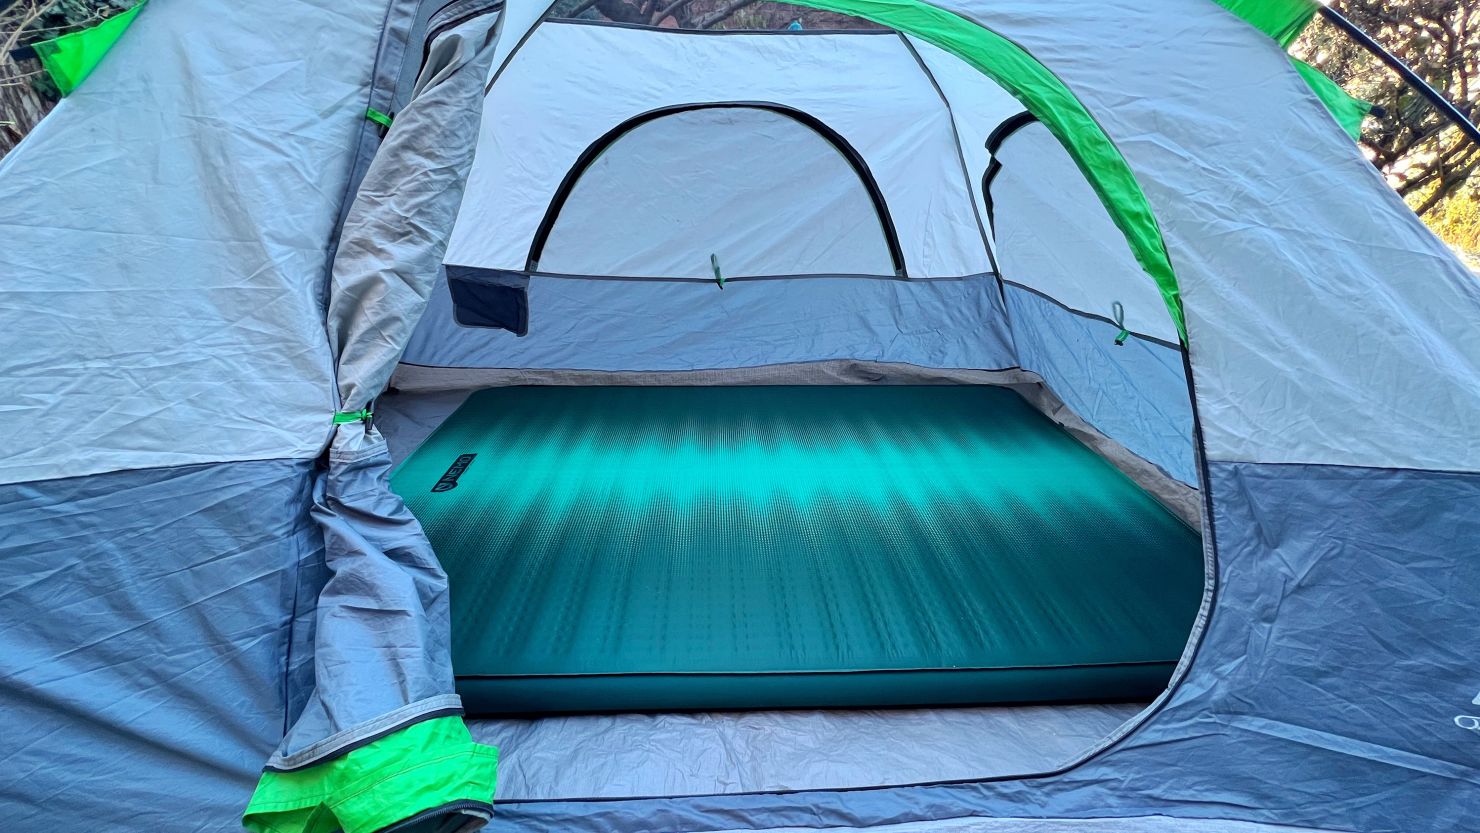 Car Camping Beds: Plan your trip with smart and durable options - Times of  India